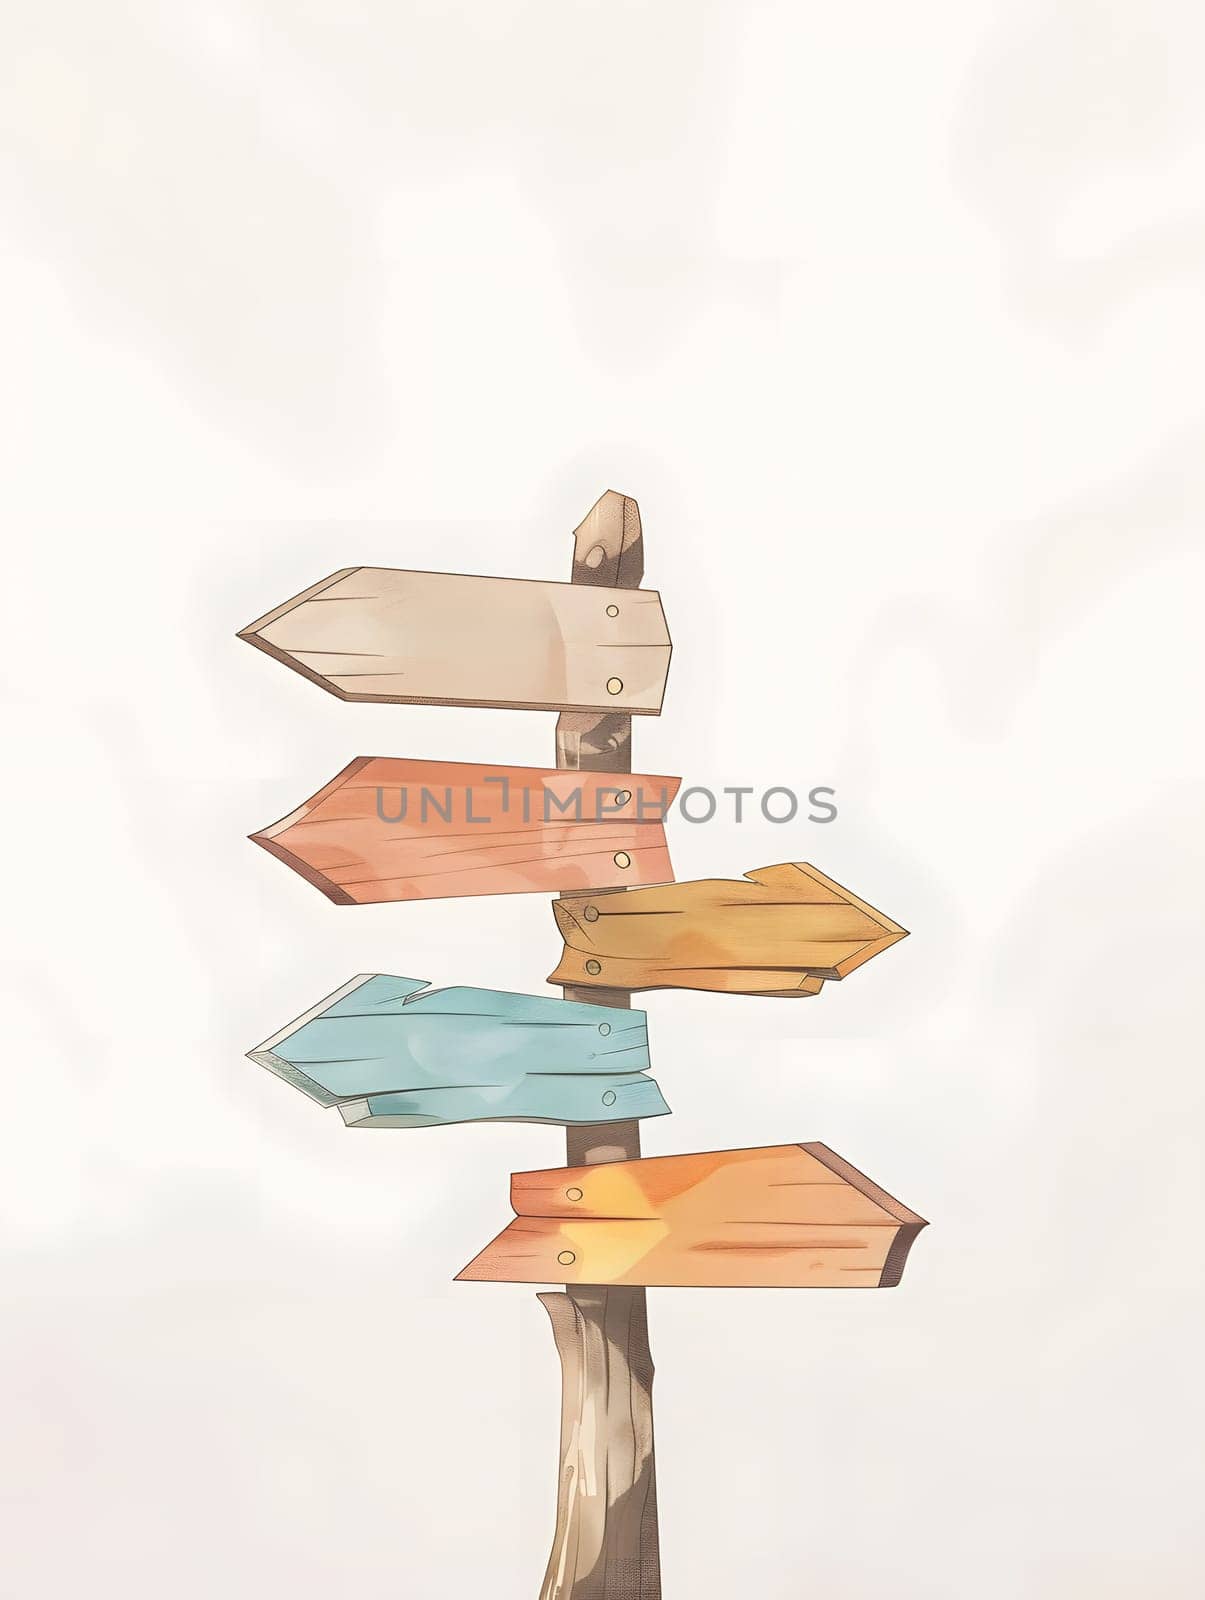 a wooden signpost with arrows pointing in different directions by Nadtochiy